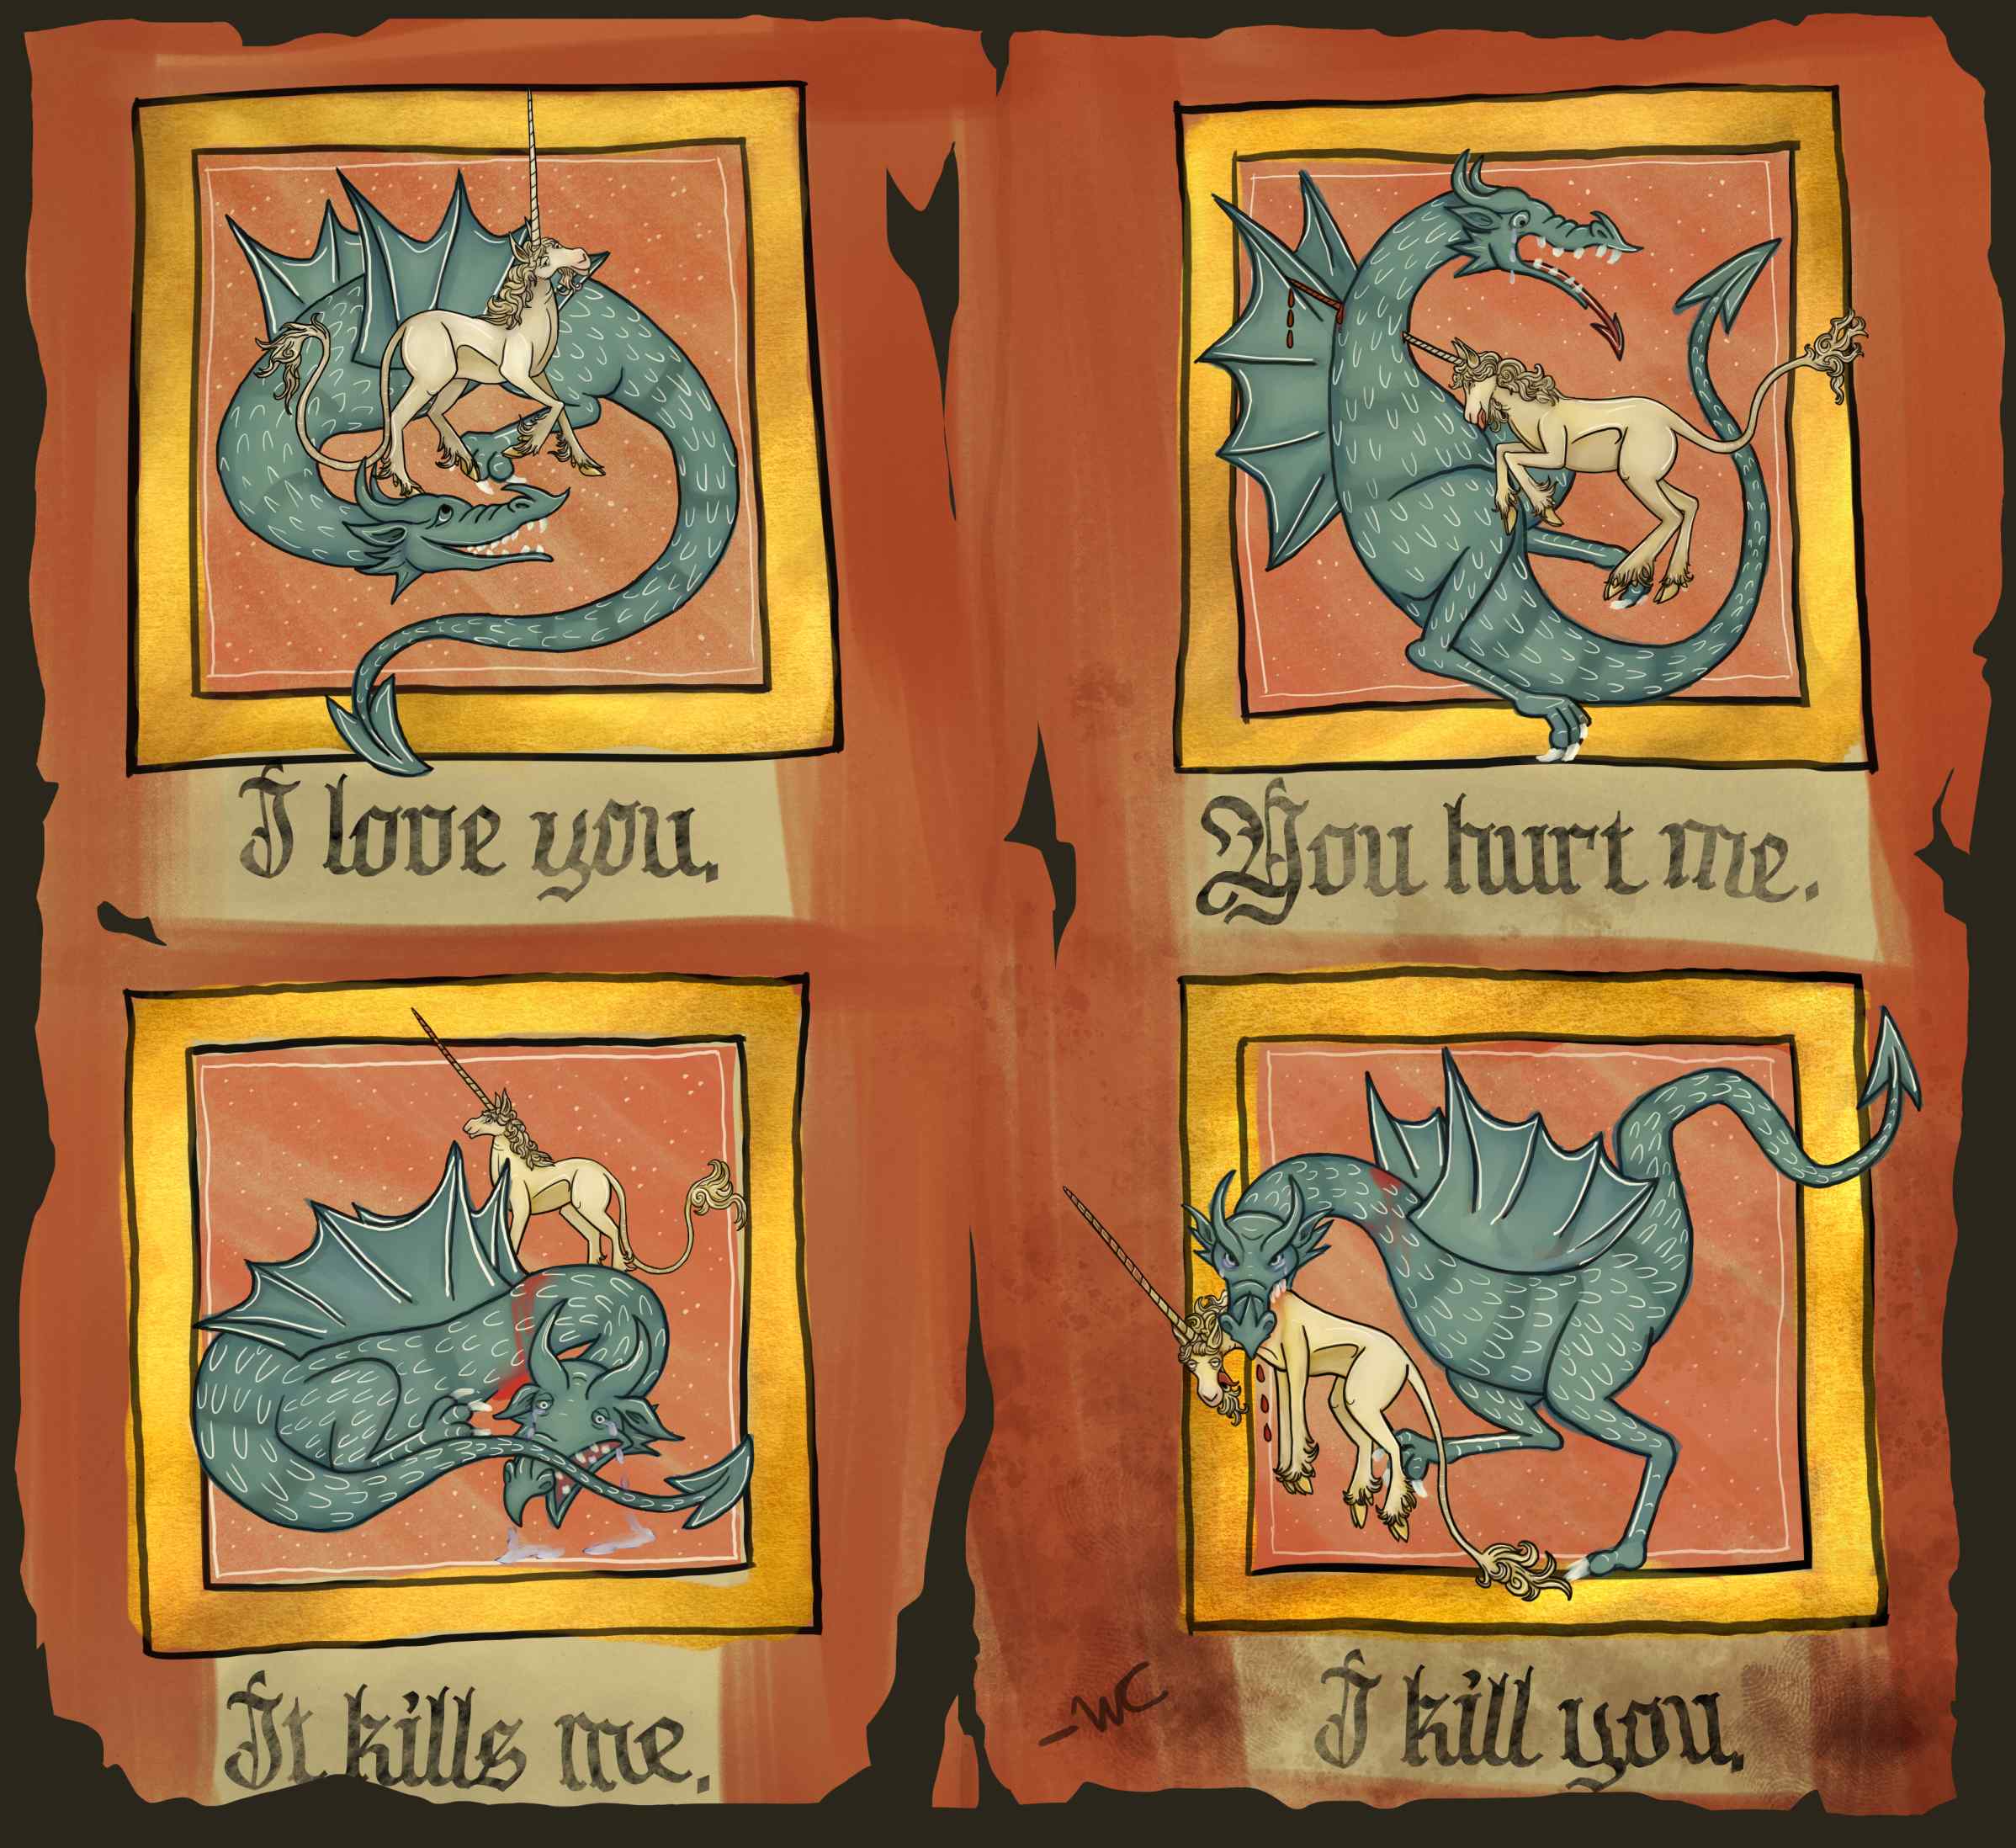 Four panels of a green dragon and a white unicorn, digitally painted in a medieval style. The image looks like a worn piece of paper. Each panel has a gold frame. In the first panel, the dragon is lovingly looking up at the unicorn; 'I love you' is written beneath it. In the second, the unicorn is stabbing the dragon with its horn; 'You hurt me' is written beneath it. Third panel: the dragon is crying and bleeding in the foreground, while the unicorn is unbothered in the background. 'It kills me' is written beneath it. In the final panel, the dragon is still bleeding and crying, but is angry, and is holding the now-dead unicorn by the neck in its jaws. 'I kill you' is written beneath it. There is a bloodstain near the final panel. 